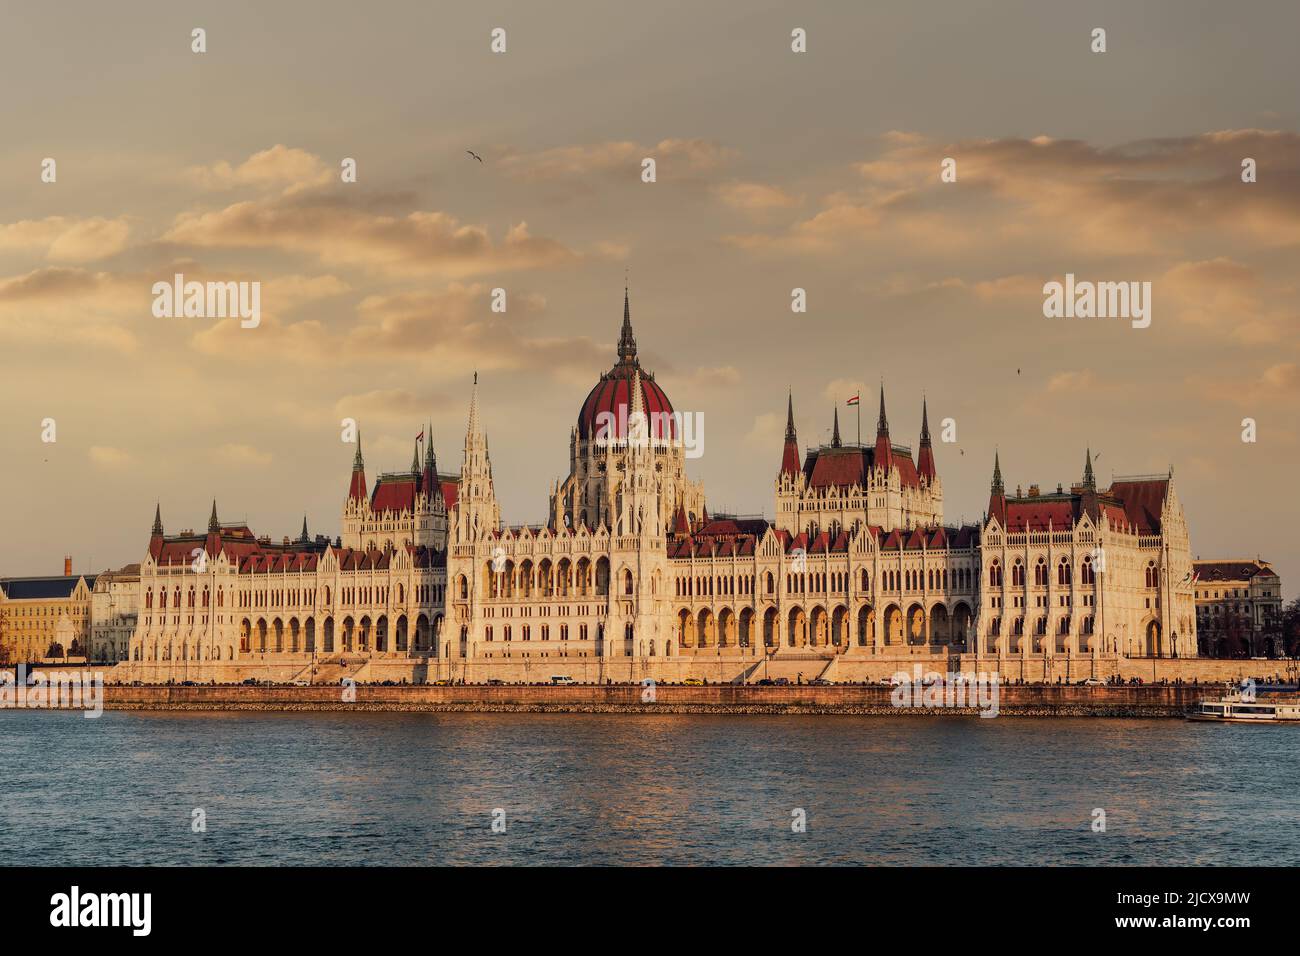 Orszaghaz Parliament neo-Gothic building and River Danube view at sunset, with clouds above, UNESCO World Heritage Site, Budapest, Hungary, Europe Stock Photo